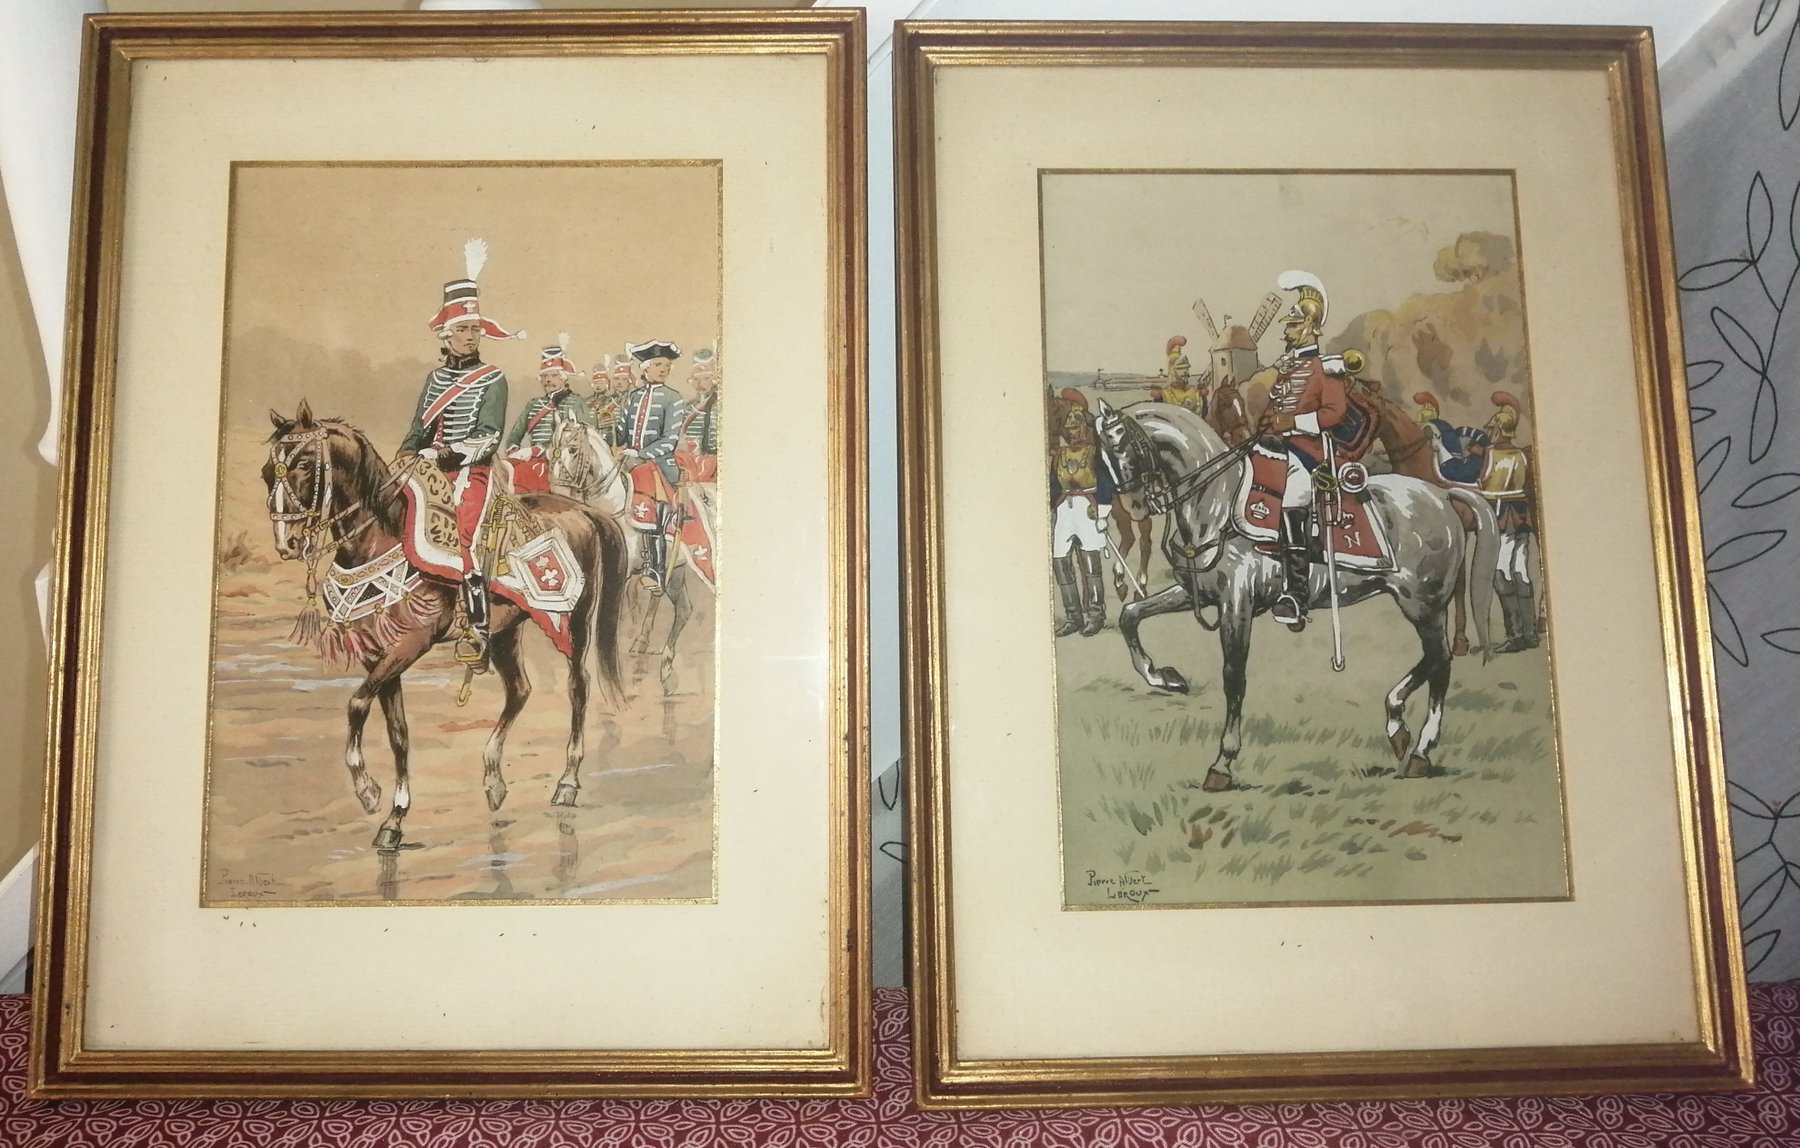 France - Cavalry - Engraving - Catawiki